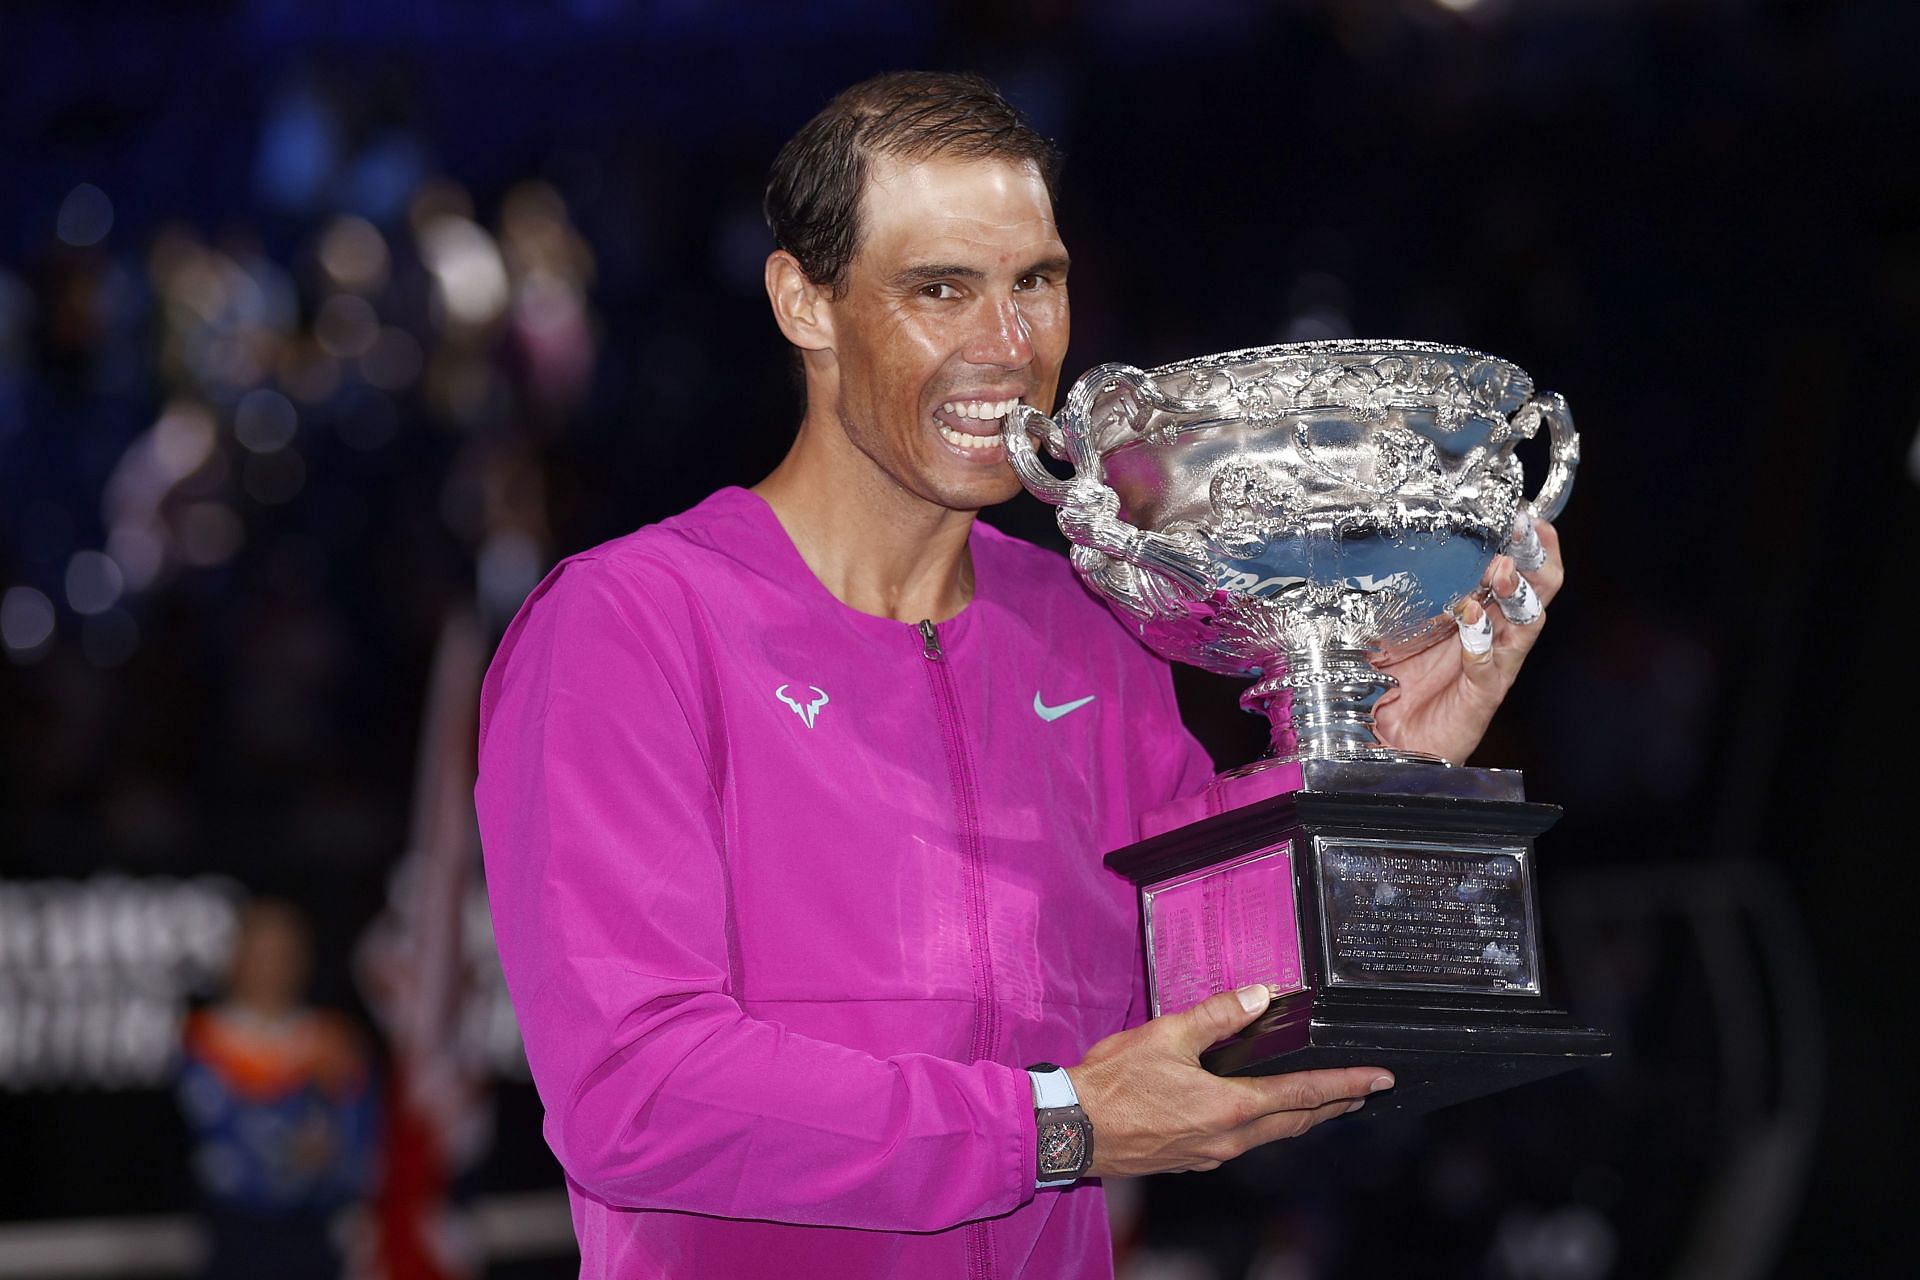 Rafael Nadal has become the first man to win 21 Grand Slam titles